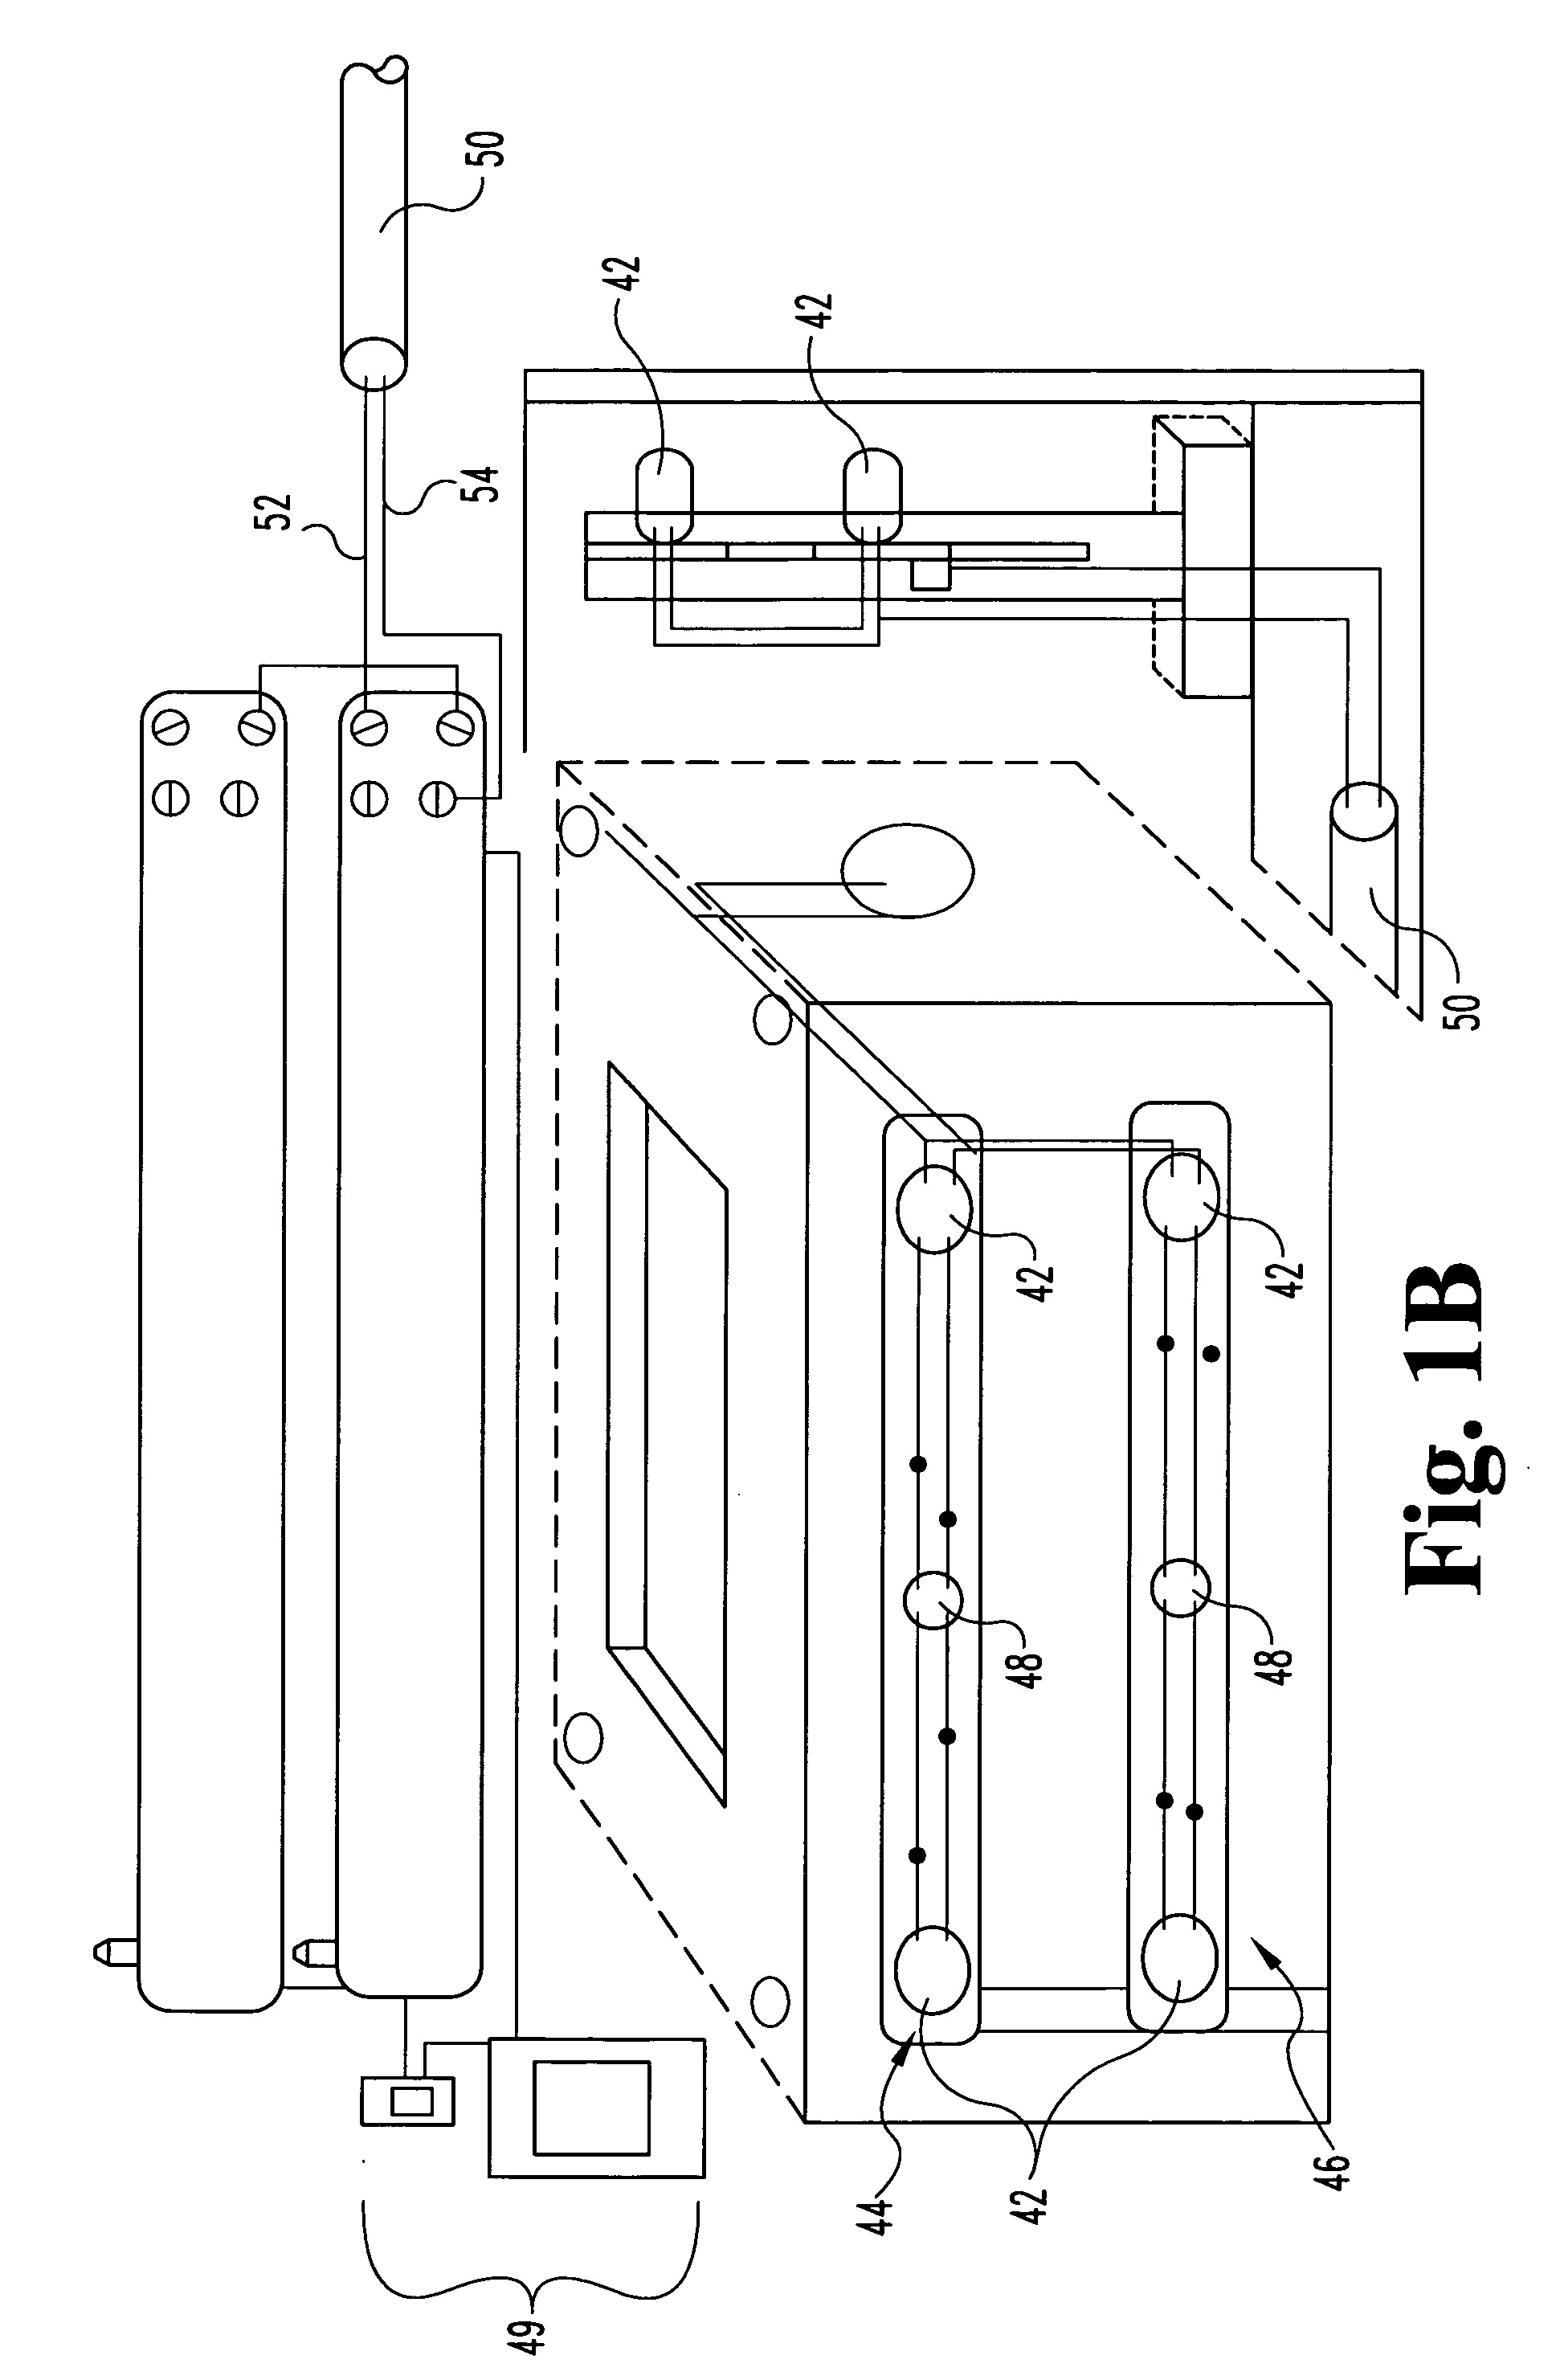 Portable illumination systems and methods of use